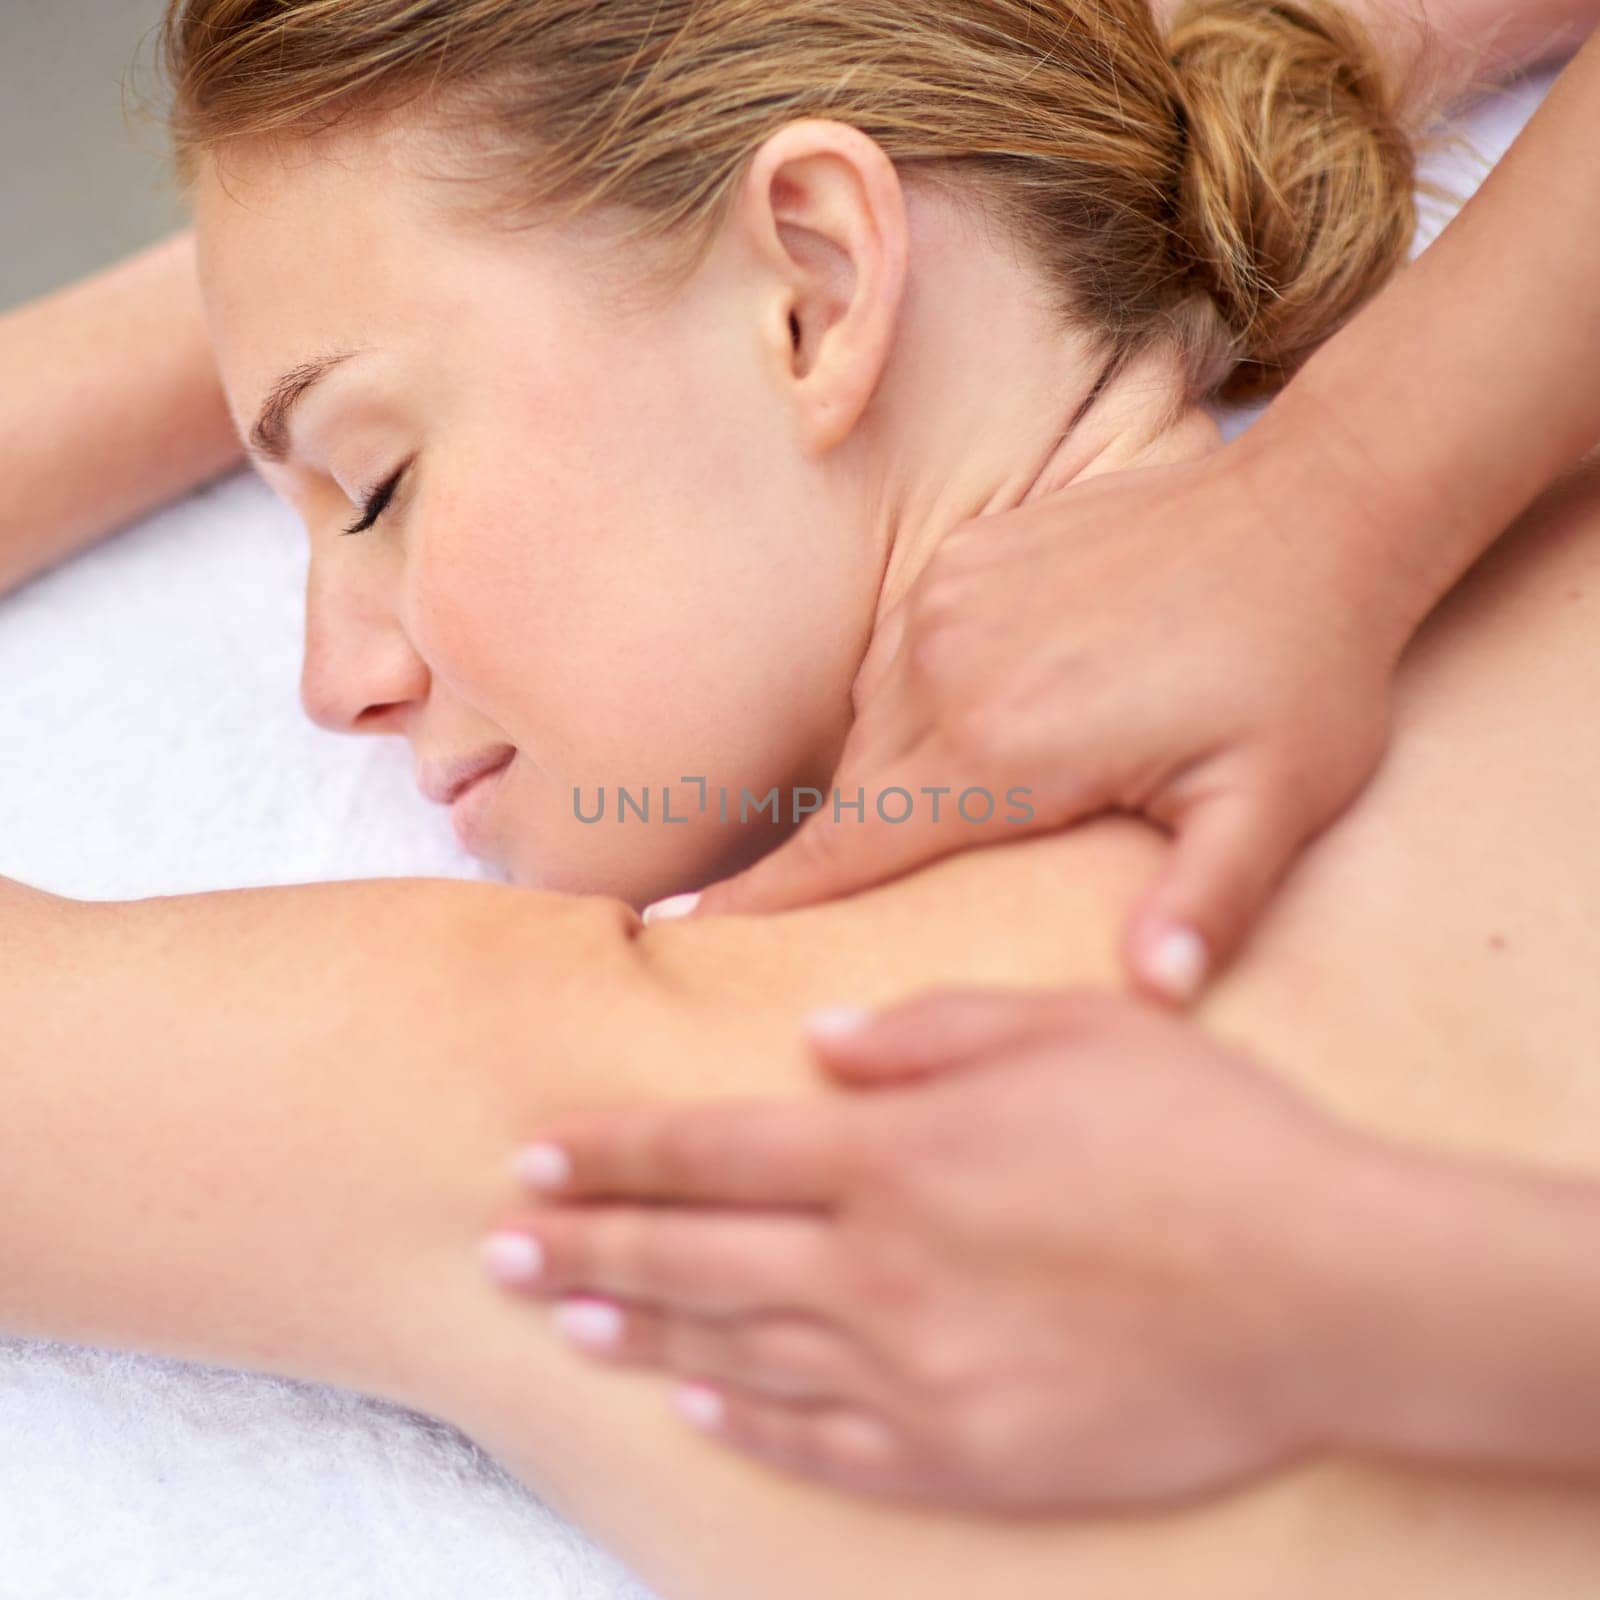 Massage, woman and spa for health, wellness and relaxation in muscles, back and neck for self care. Female person, physical therapy and detox for body with smile, calm and happiness on vacation.